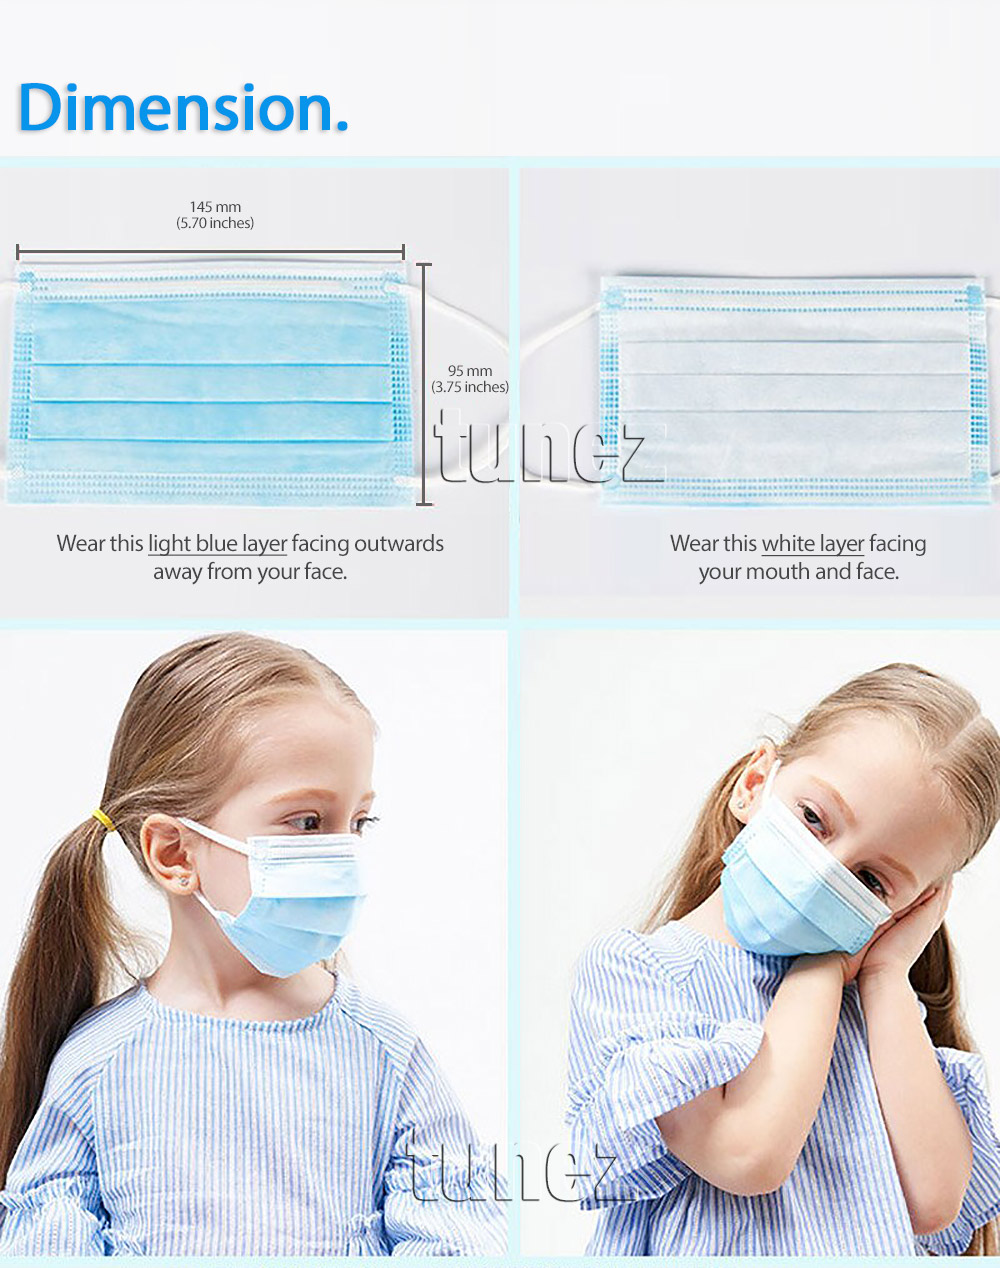 FM02 Kids Children Child Age 4 to 12 Medical Procedure Facial Mask Face 50 pieces 3 Ply Layers Disposable Mouth 3 Protective Non Woven Hygiene Hygienically Individually Packed Dustproof Bacteria Blue Green Ear Loop Aluminium Nose Guard Hypoallergenic Filtration Efficiency BFE 95%